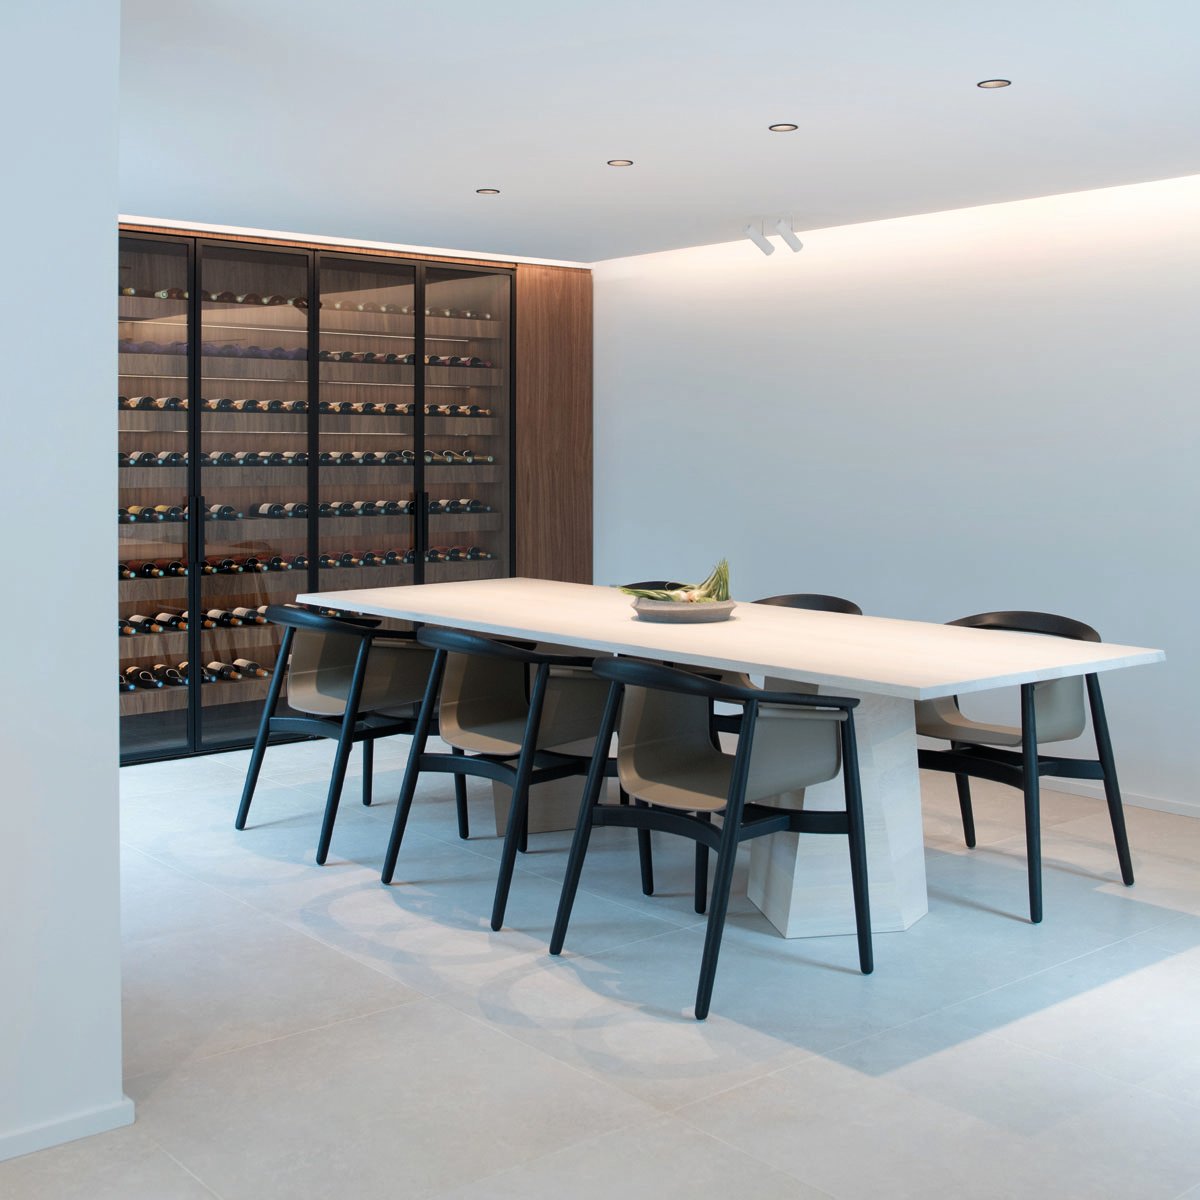 Minimalist interior, marble table, tall wine rack unit, lit fireplace, Bespoke Spaces for Wine in white font to centre right